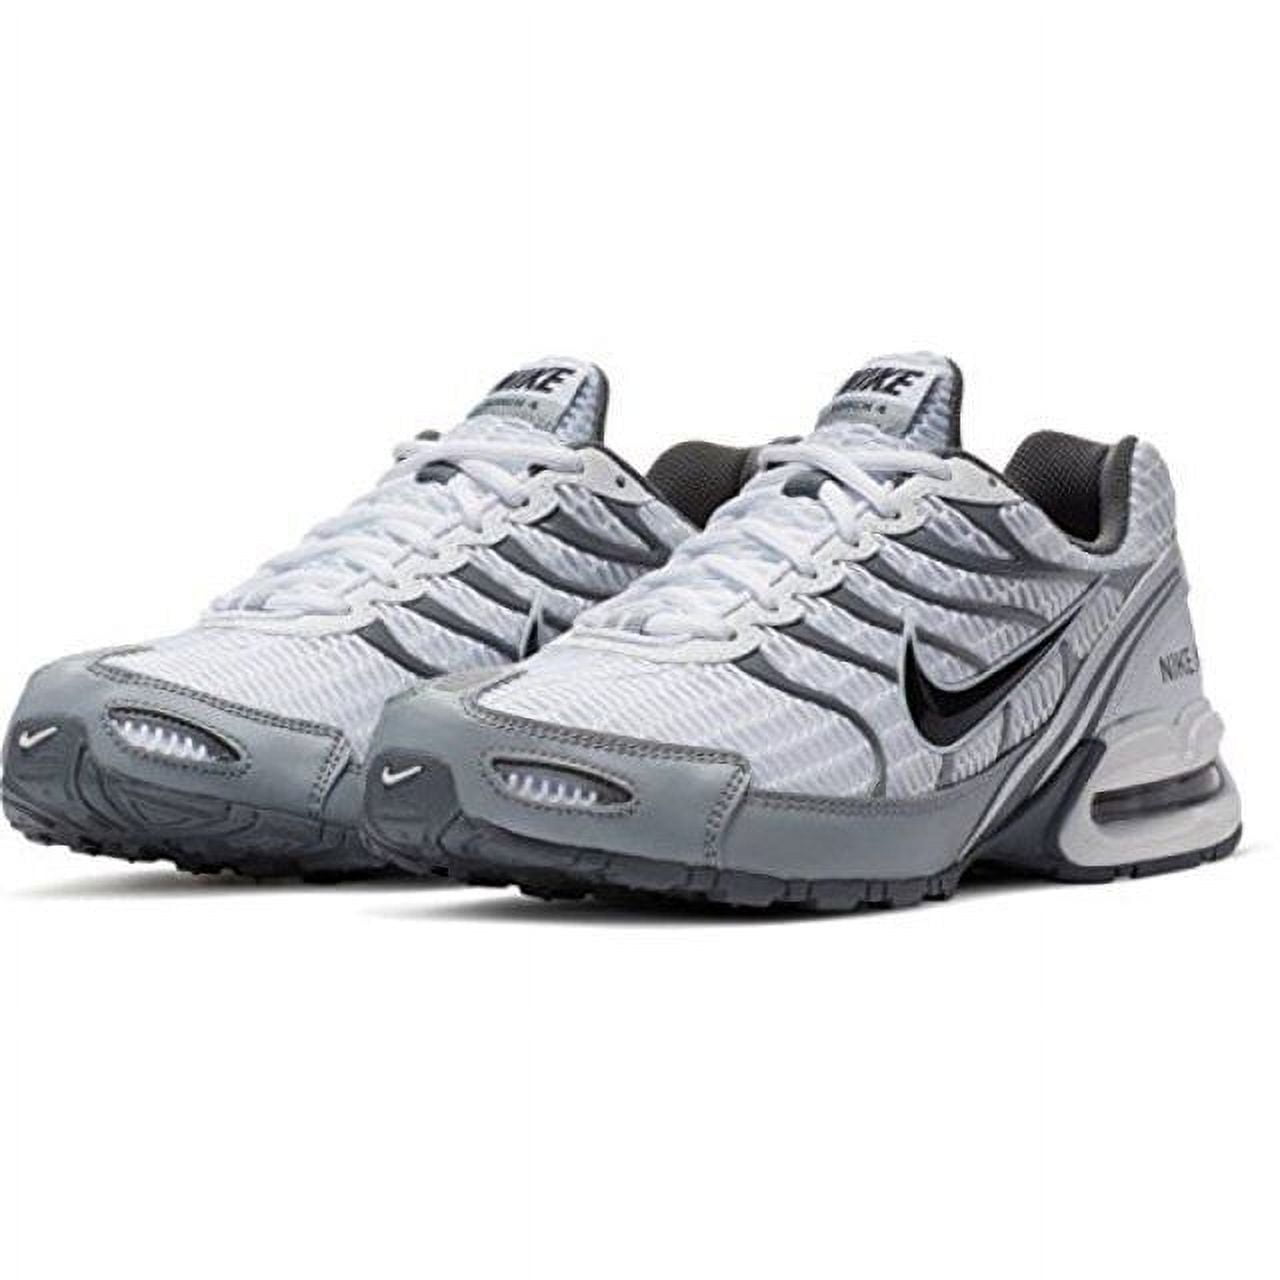 Nike 343846-100: Mens Air Max Torch 4 White/Anthracite/Wolf Grey ...